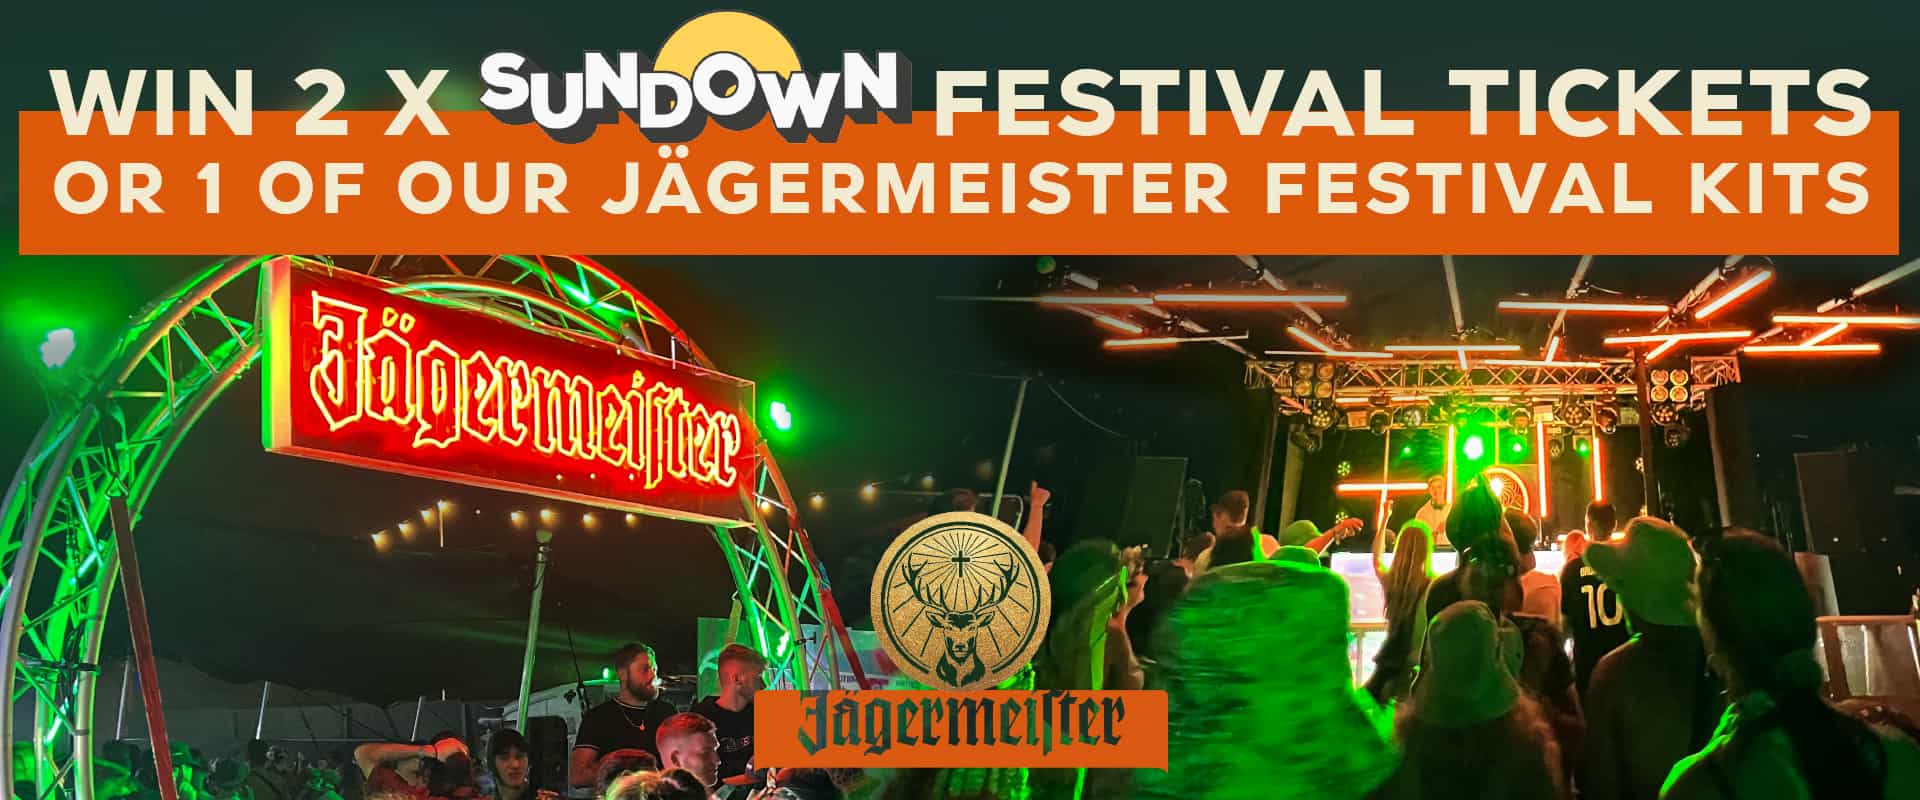 Win 2 tickets to Sundown Festival with Jagermeister and Zinc Taunton